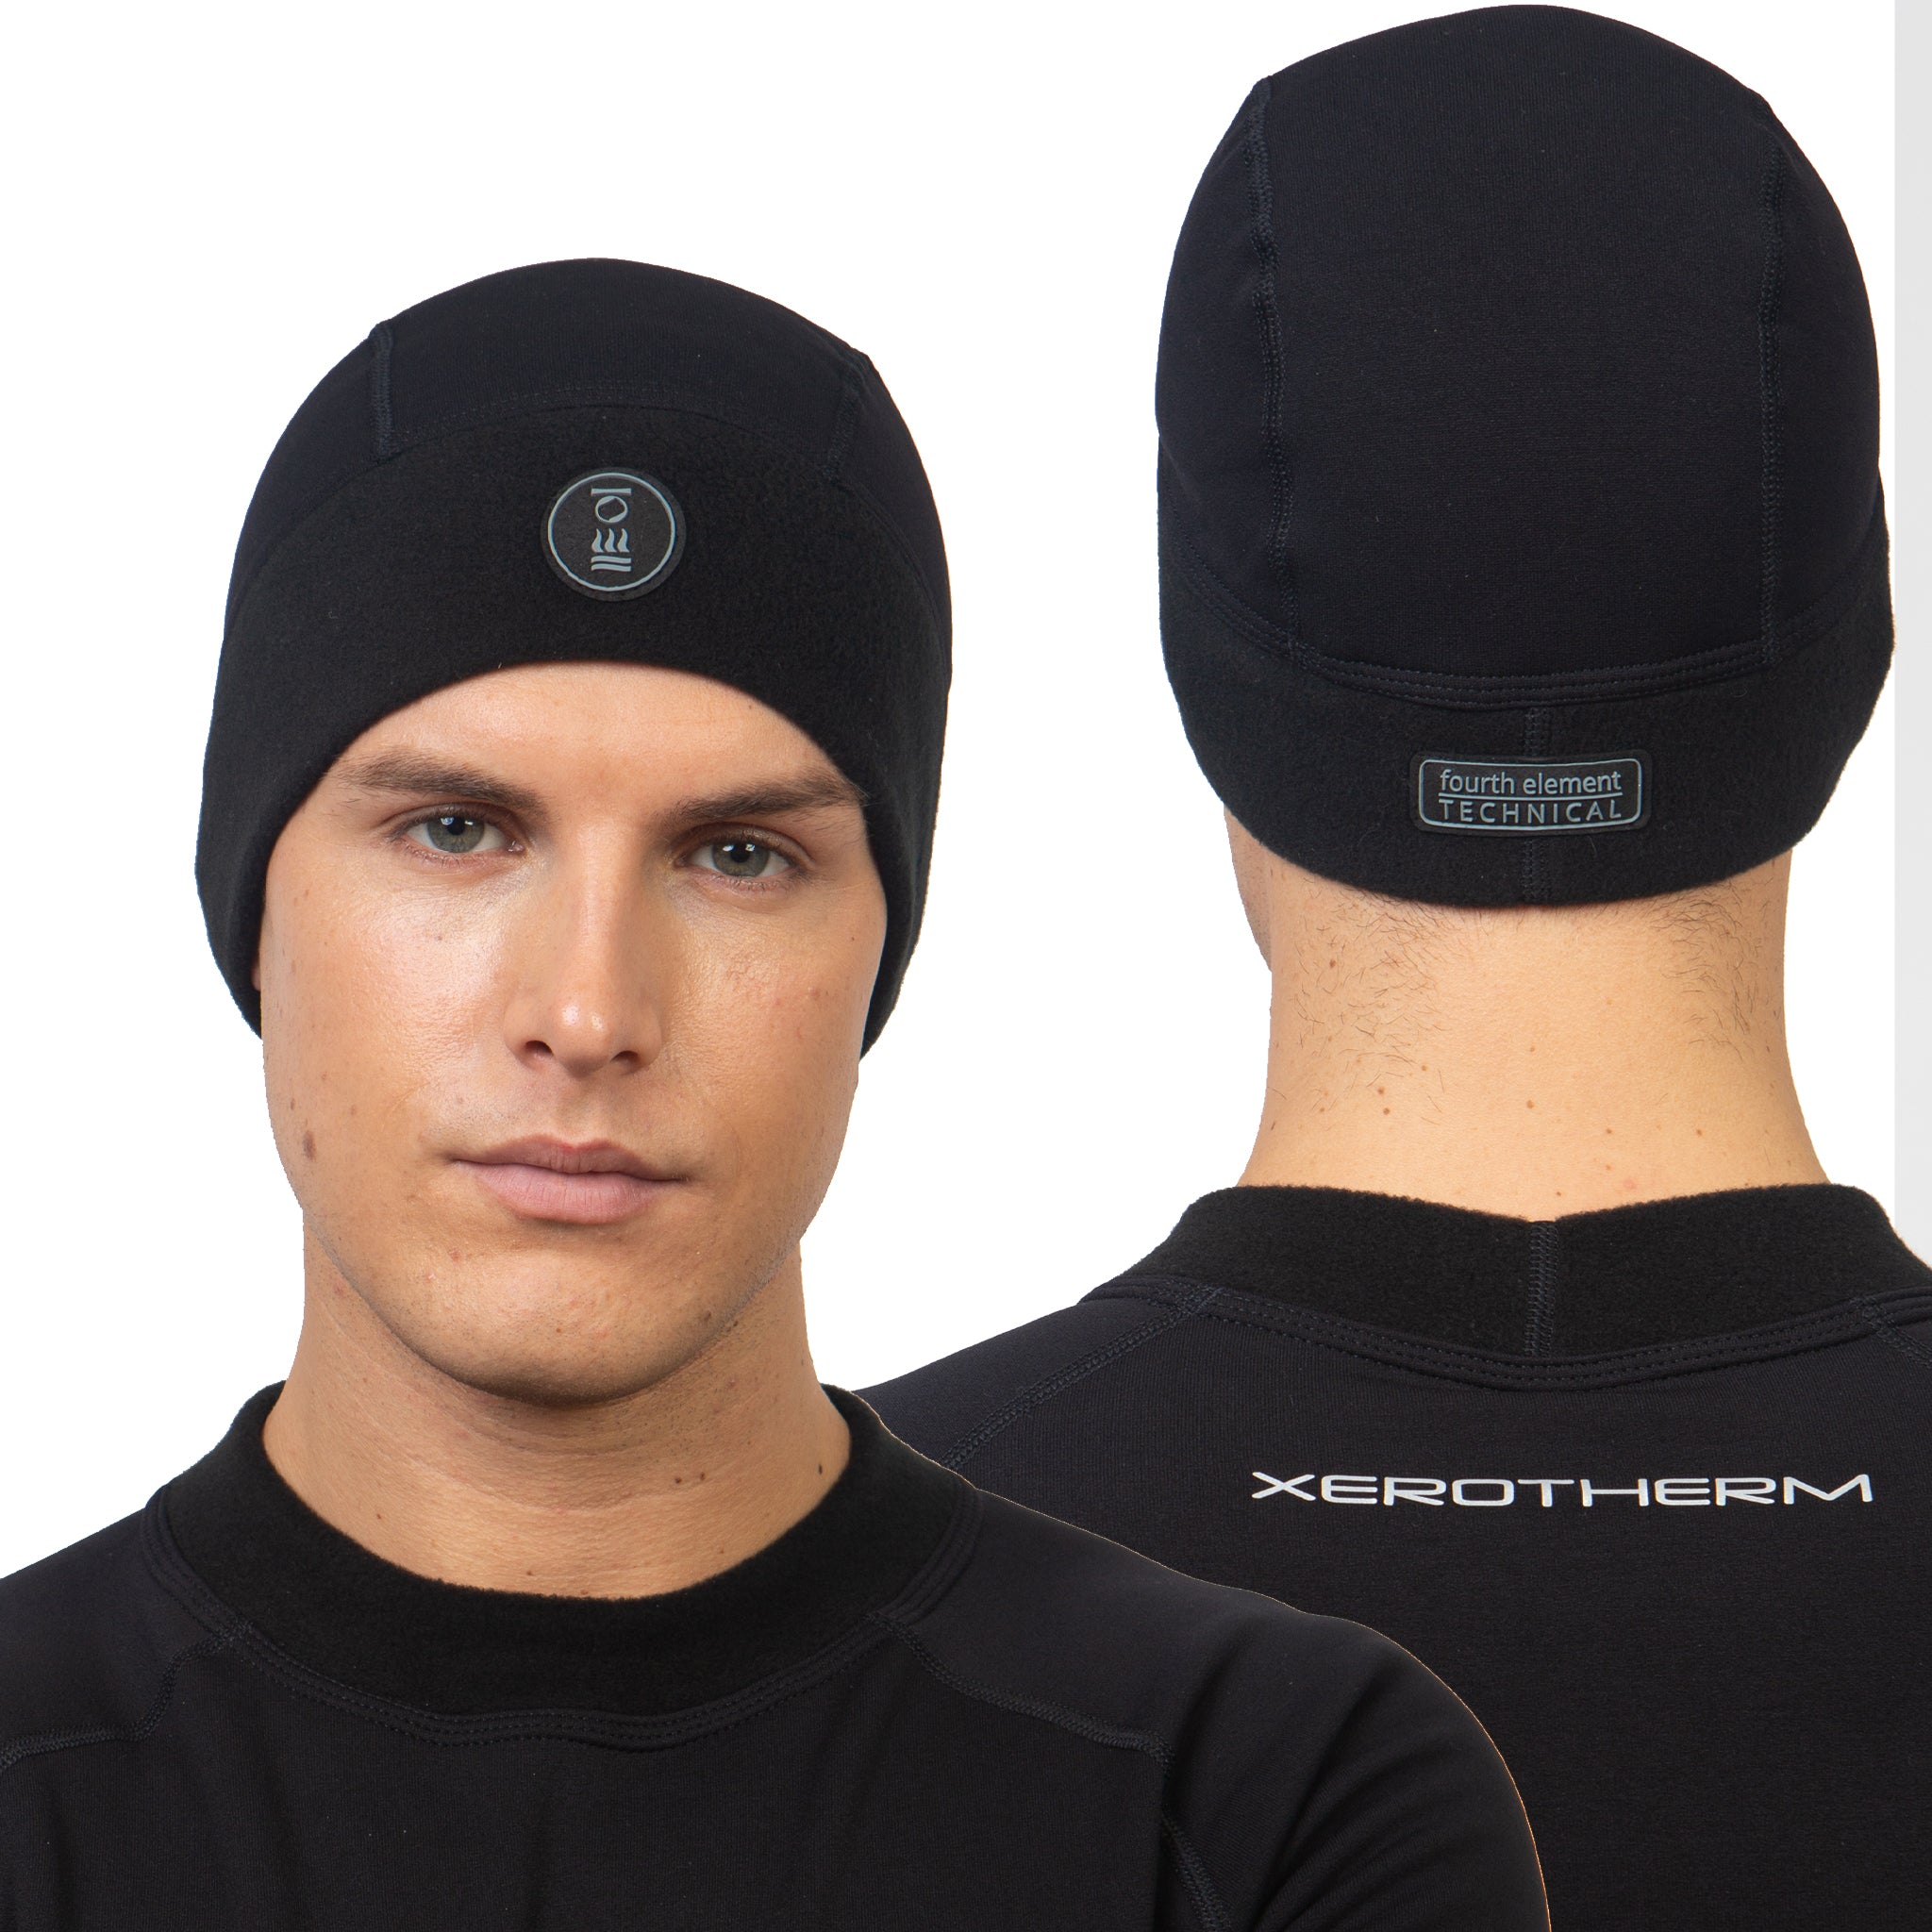 Fourth Element Xerotherm Beanie Thermal Hat